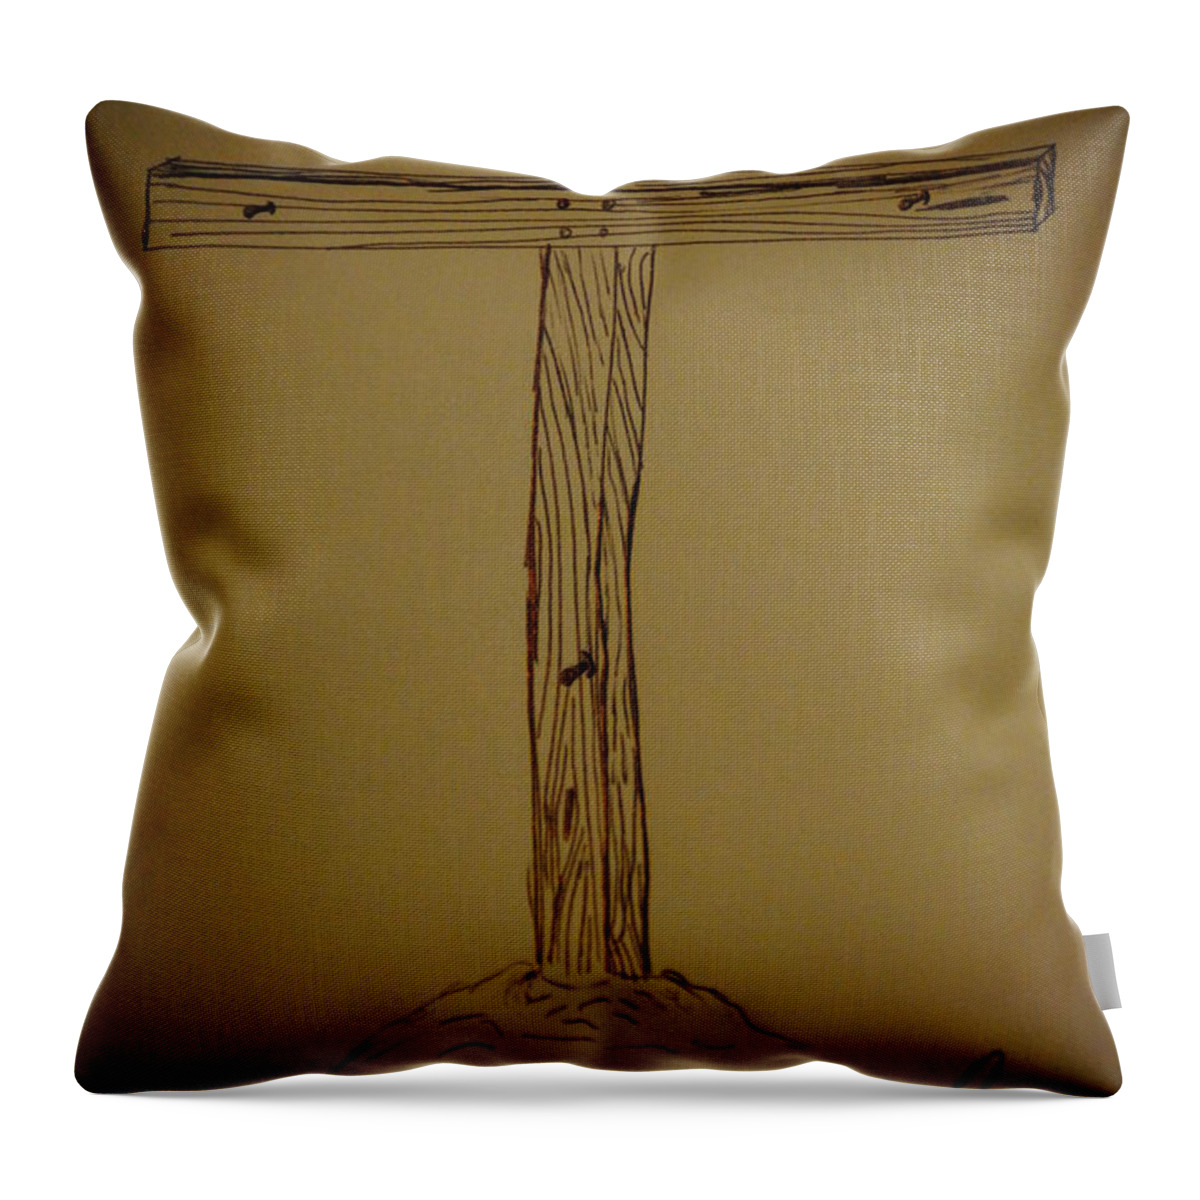 Cross Throw Pillow featuring the drawing Him Alone by Eric Liller